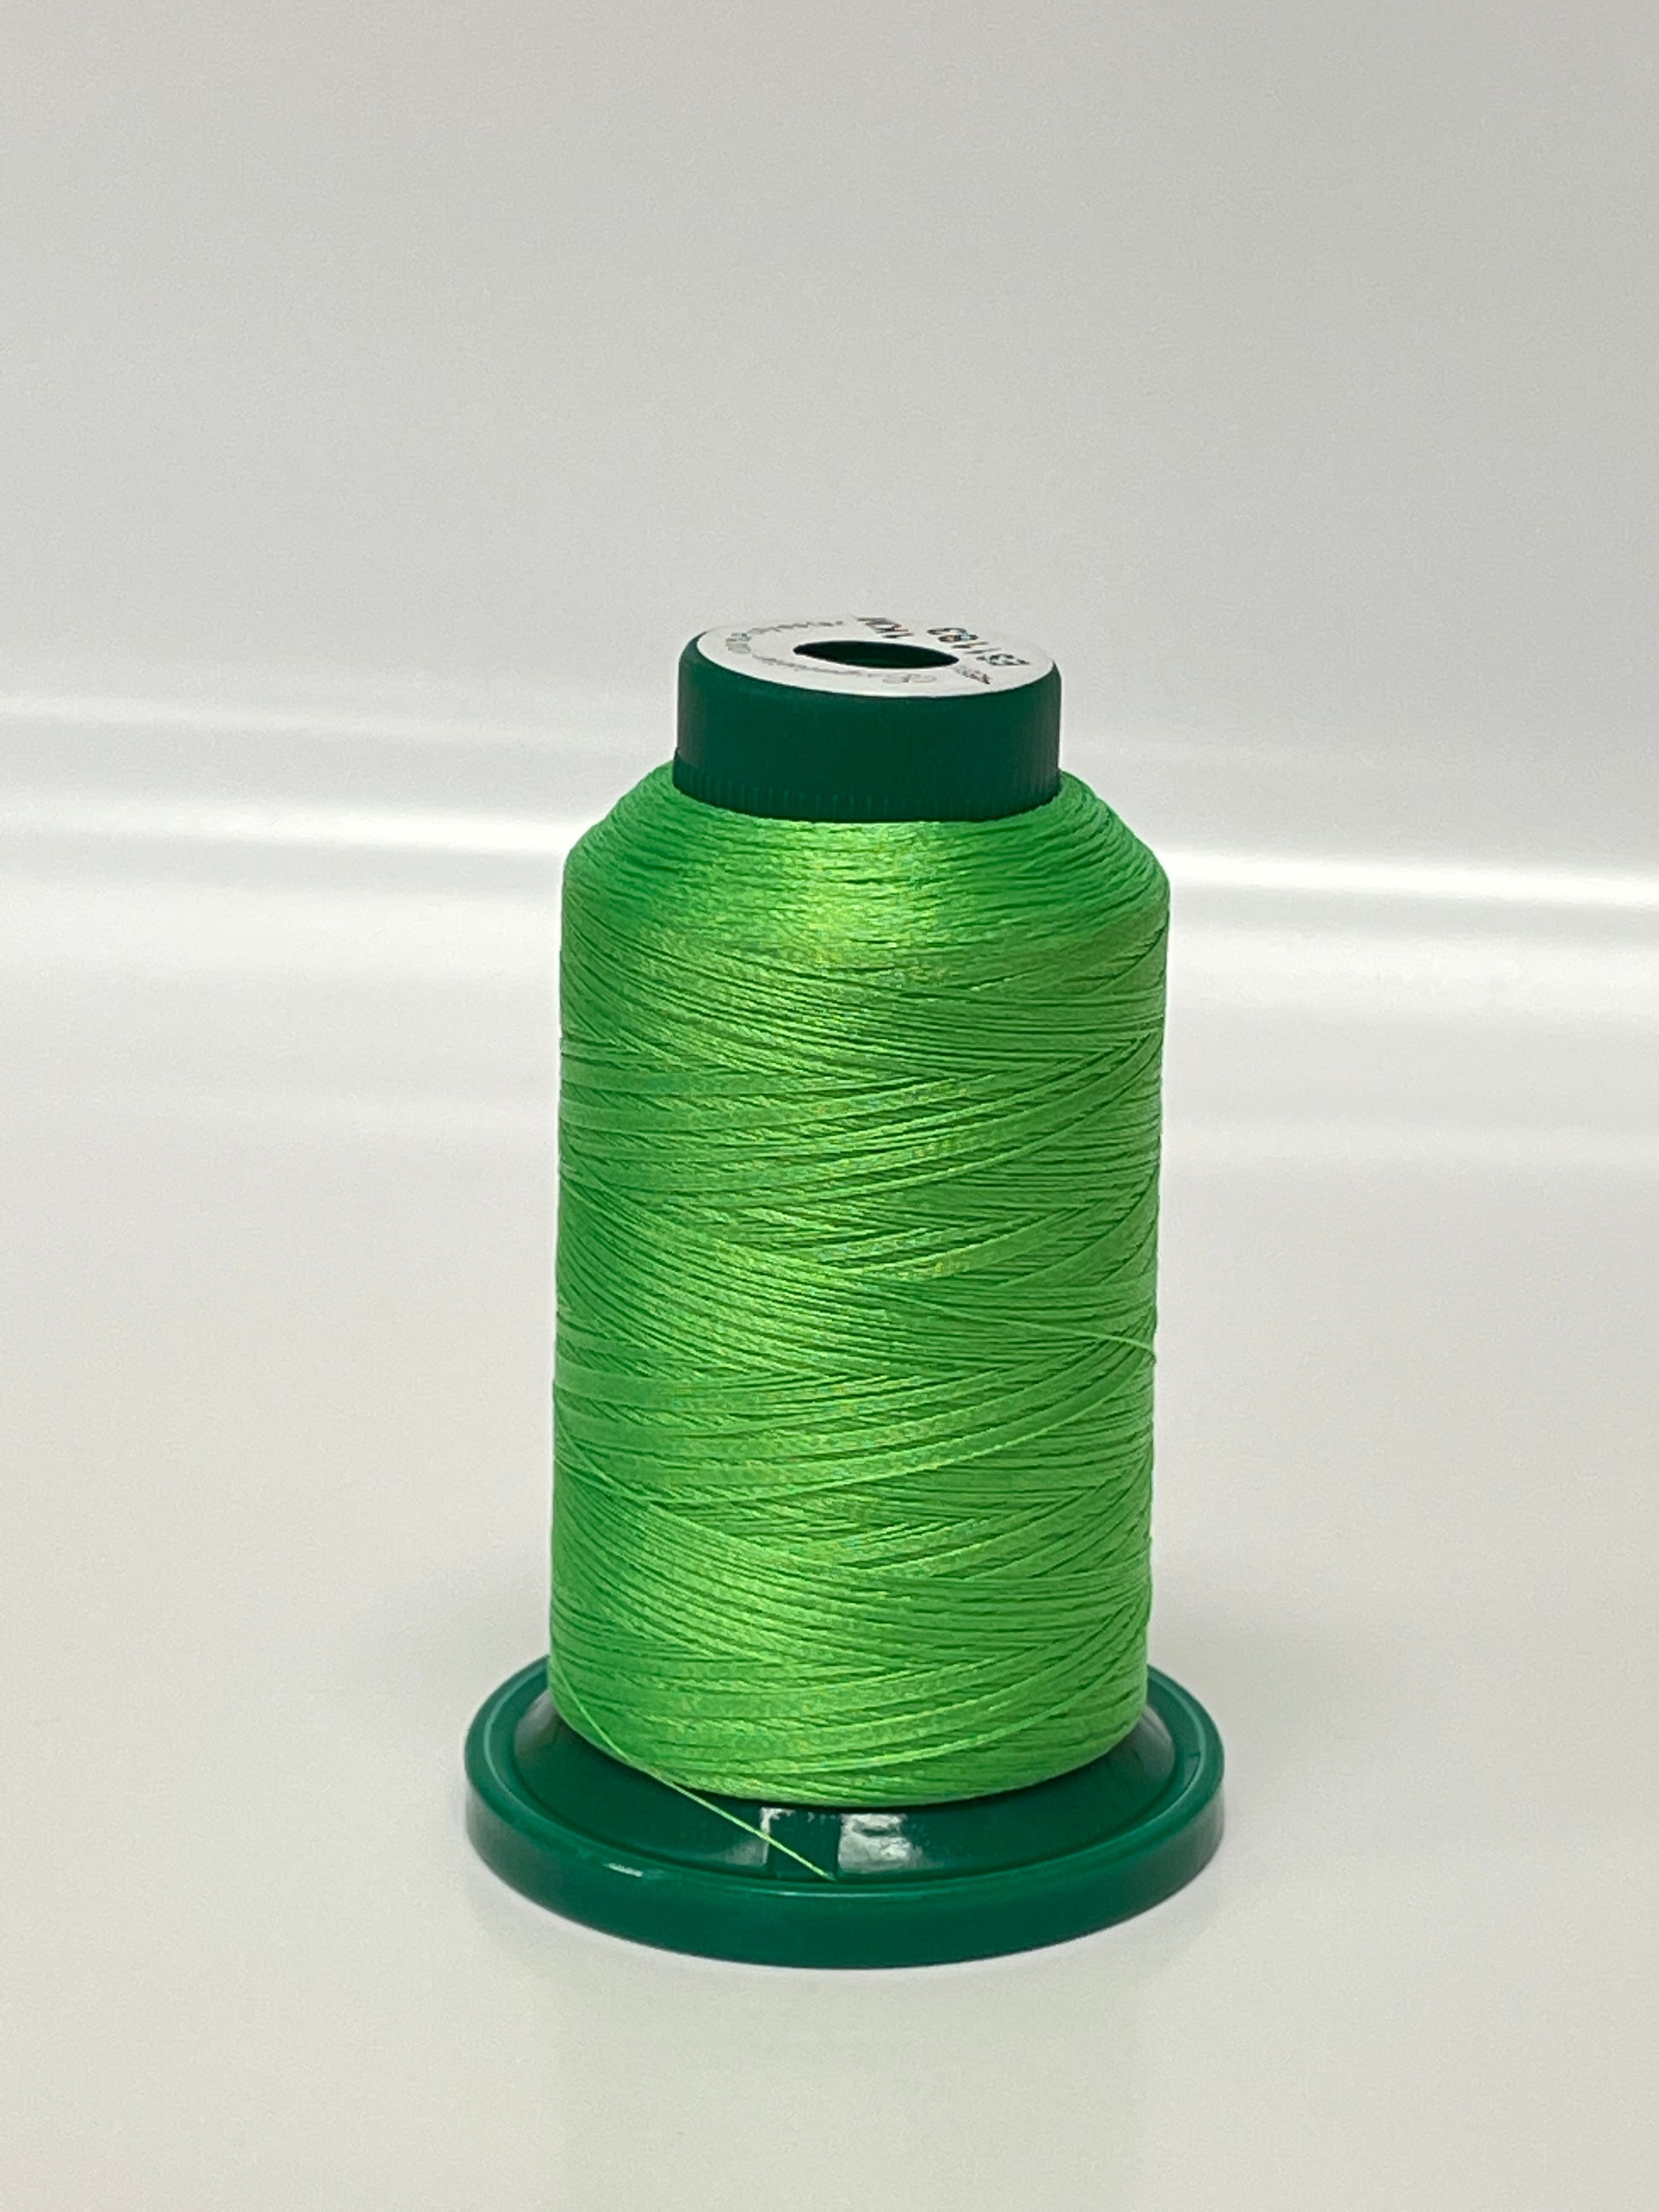 Exquisite Embroidery Threads - Greens Leabu Sewing Center –